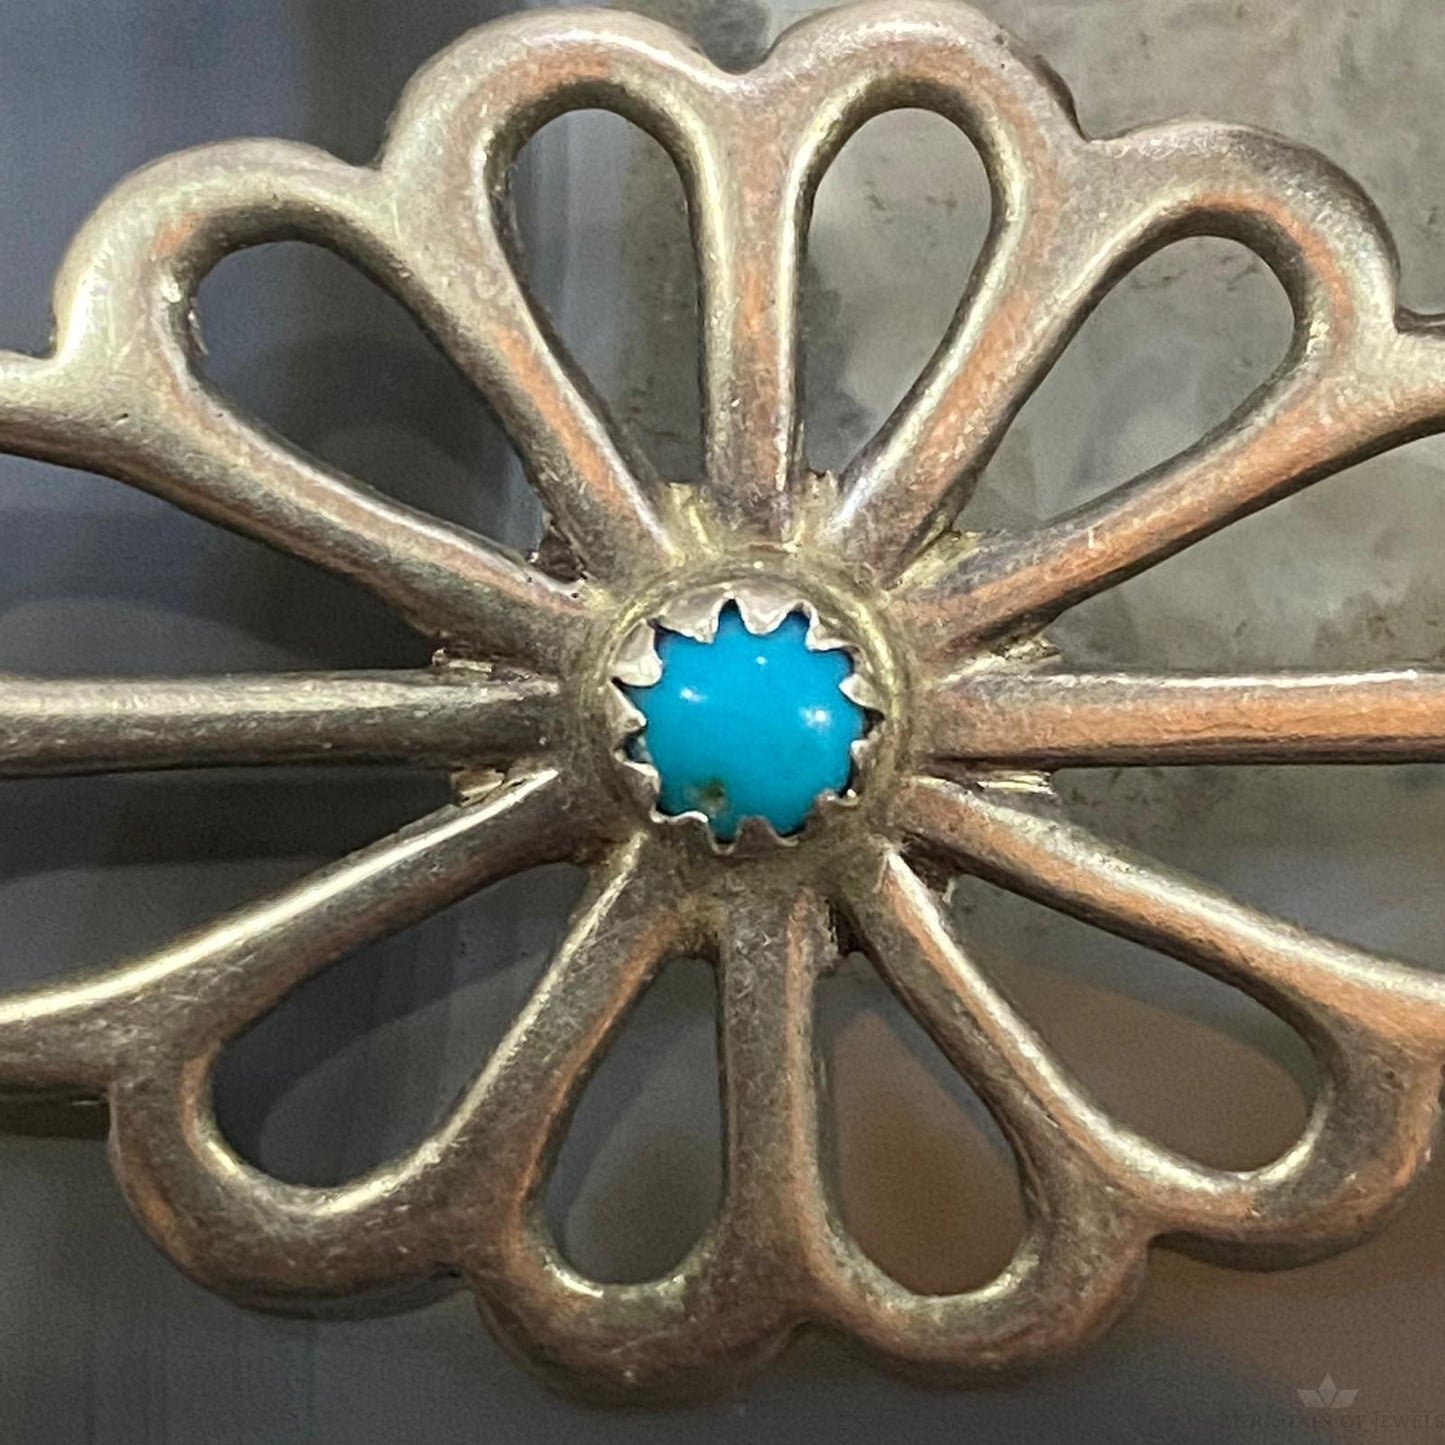 R. Wilson Vintage Sterling Silver Round Turquoise Sandcast Flower Brooch For Women